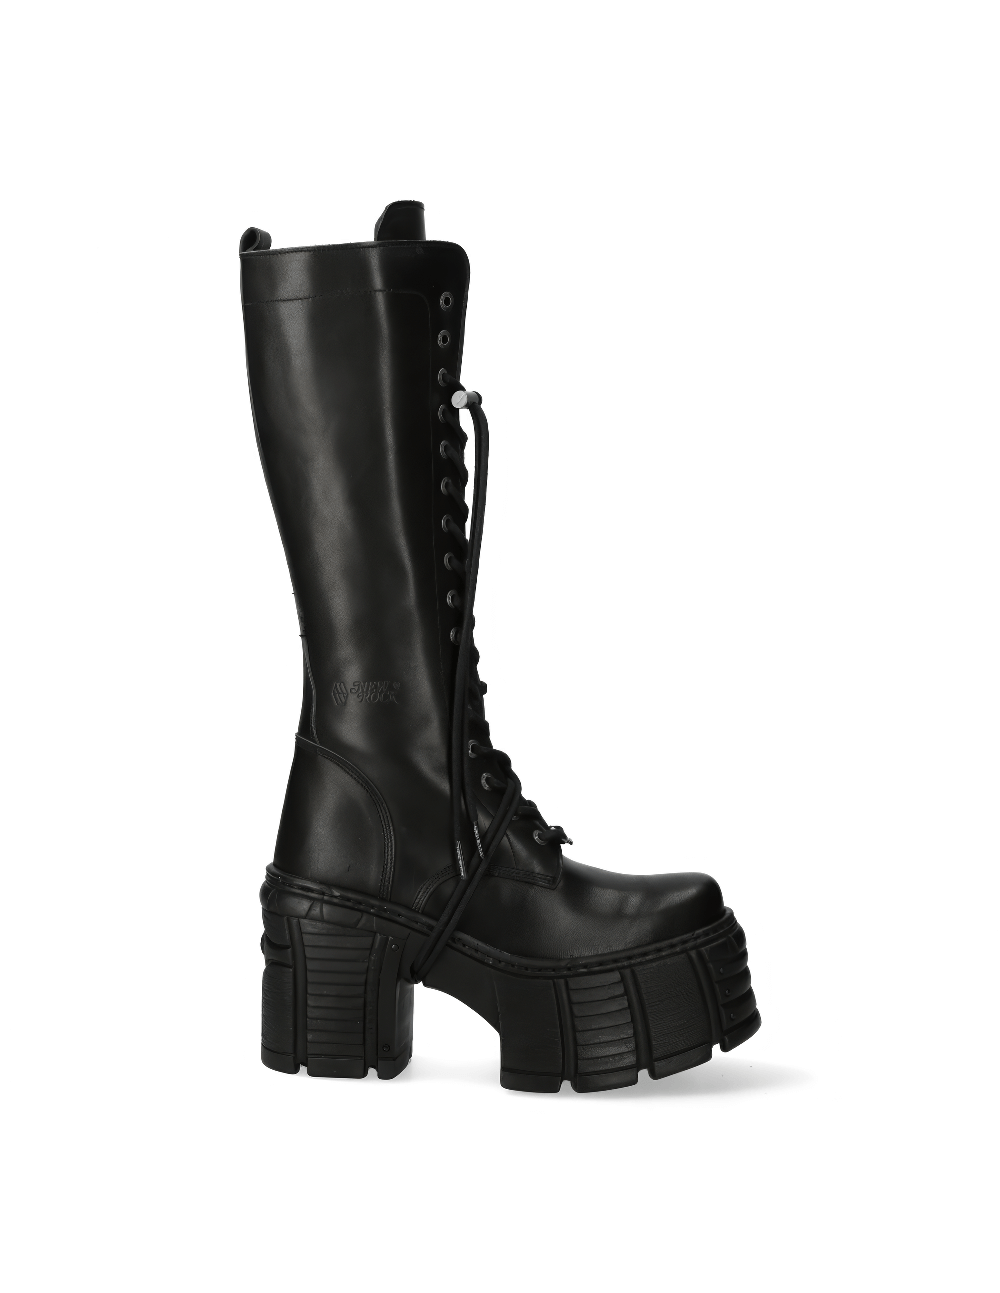 NEW ROCK Punk Lace-Up Black Leather Knee High Boots